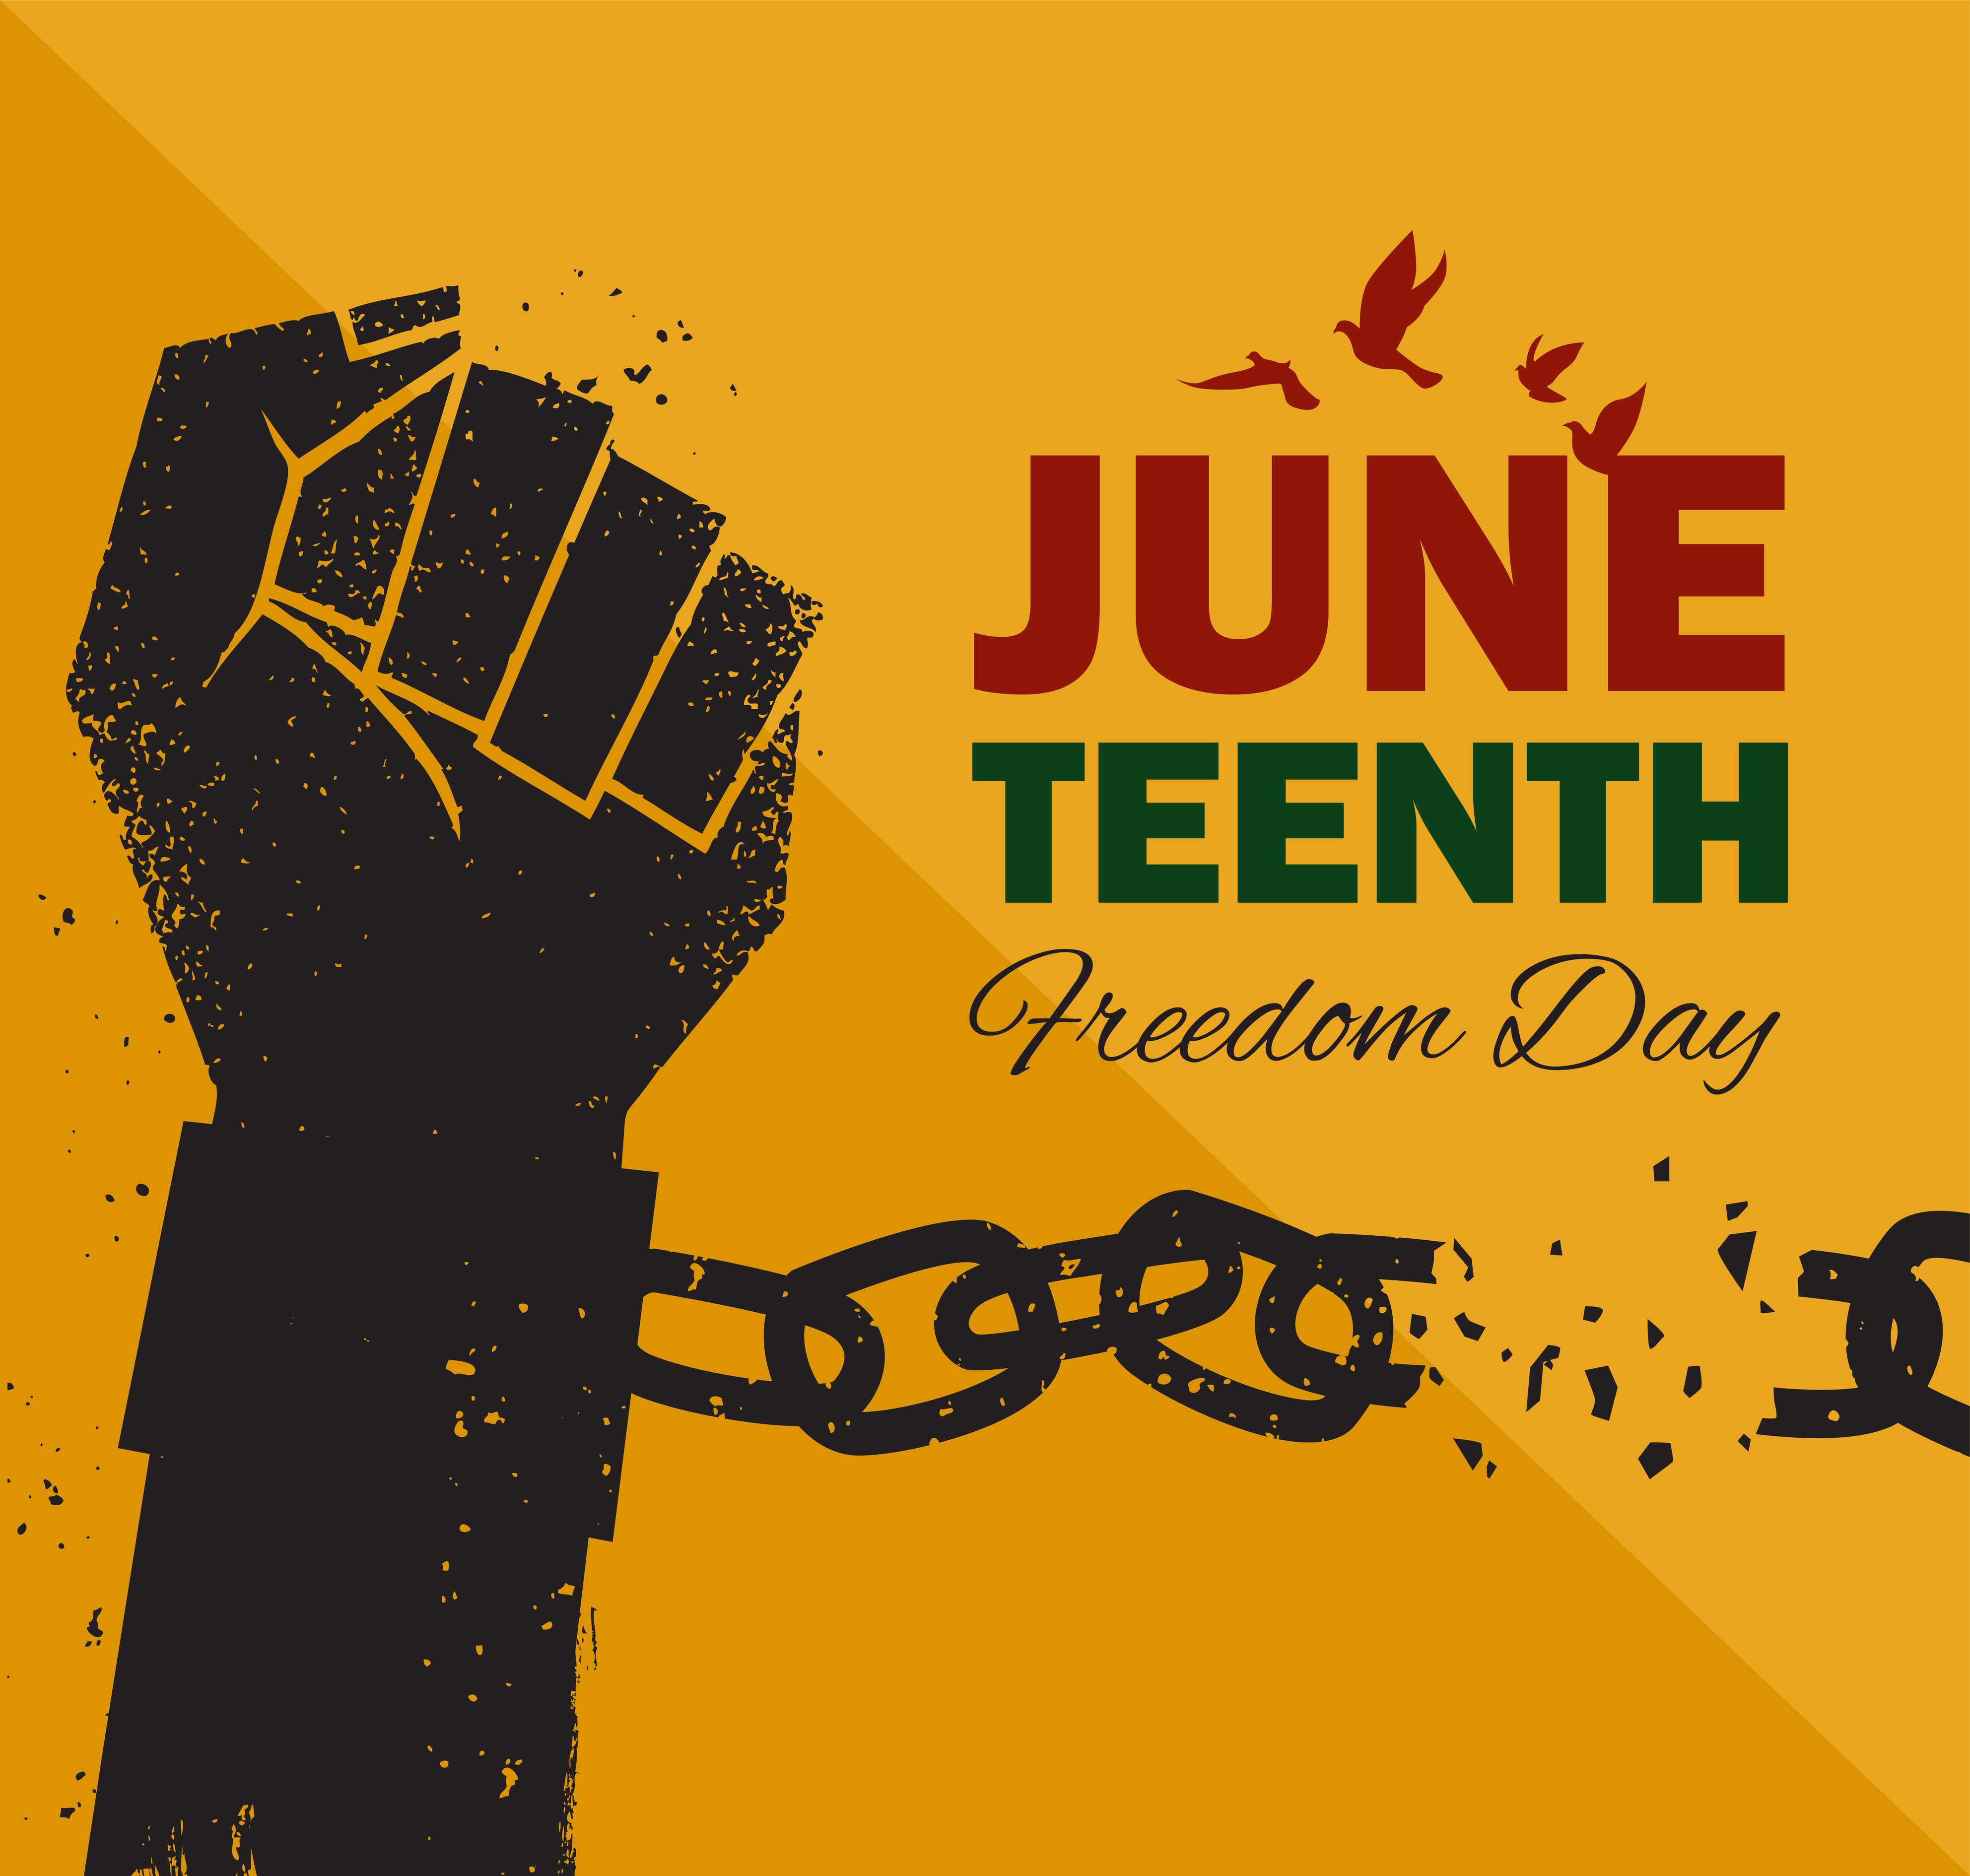 Juneteenth Trivia questions & answers